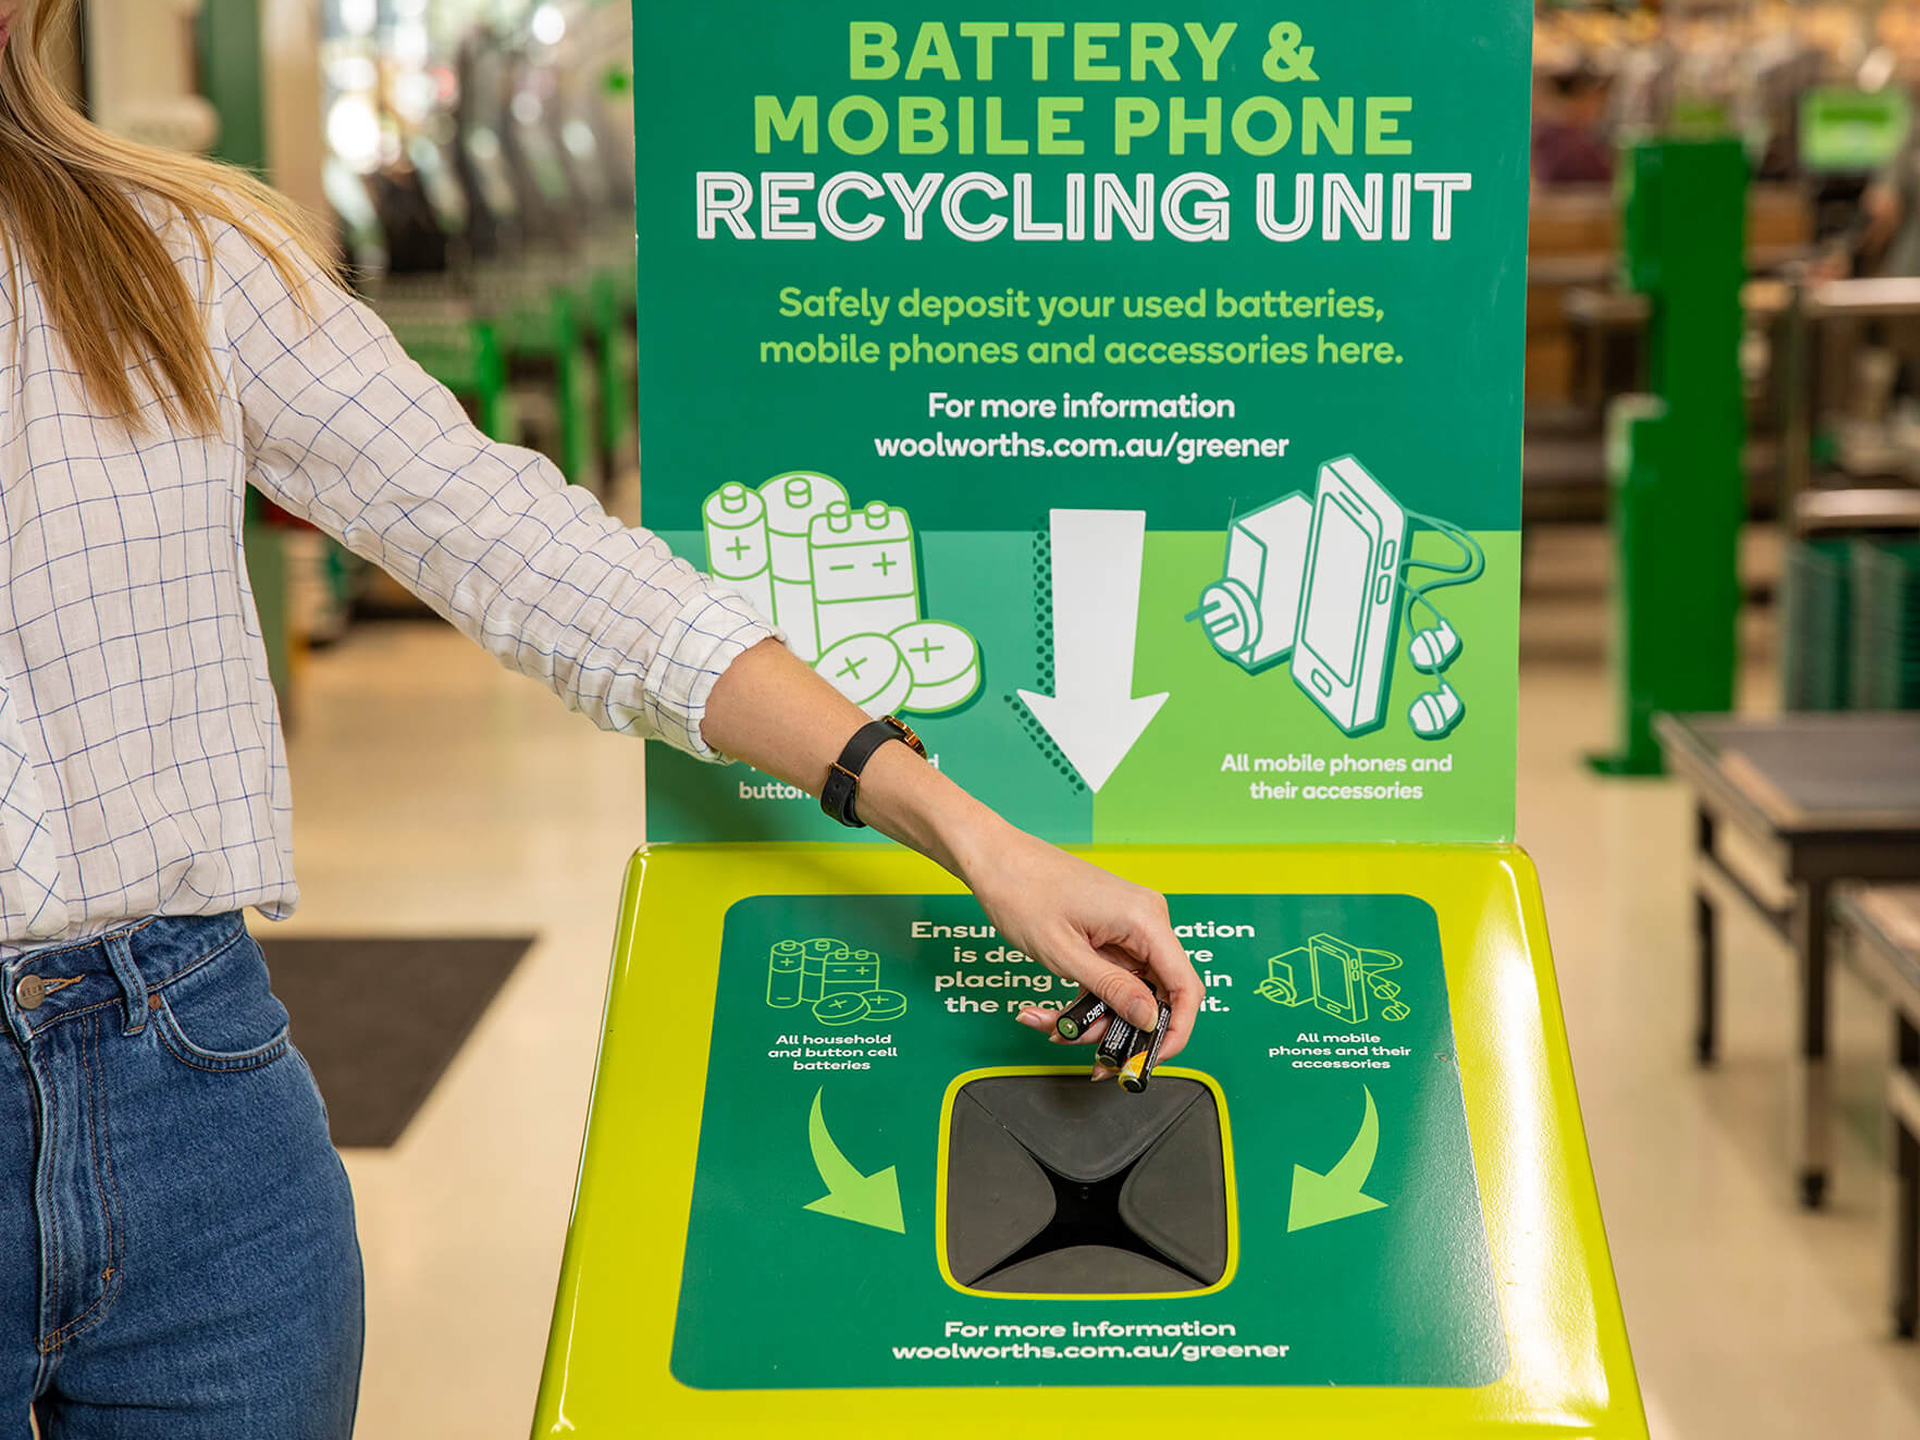 Recycle batteries. Battery Recycling. Phone Recycling. Recycling point. Ultra mobile points of recyclables.